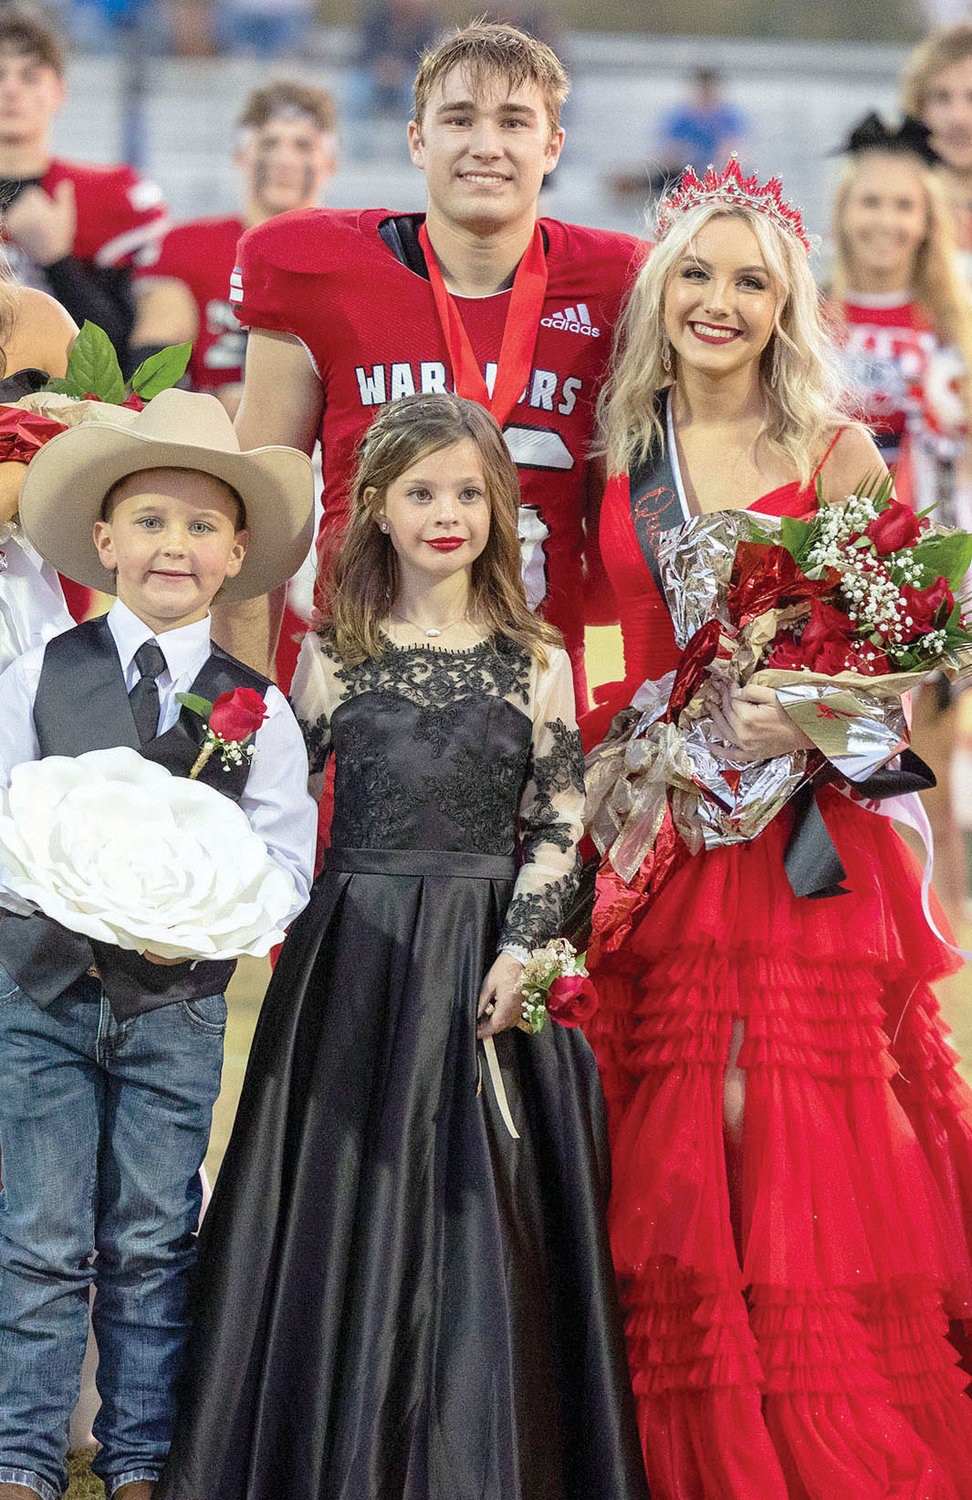 Washington’s homecoming coronation saw the crowning of Lydia Horinek as queen and Brayden Arthur as king. The crown bearer was Will Taylor and the flower girl was Harley Maddox.